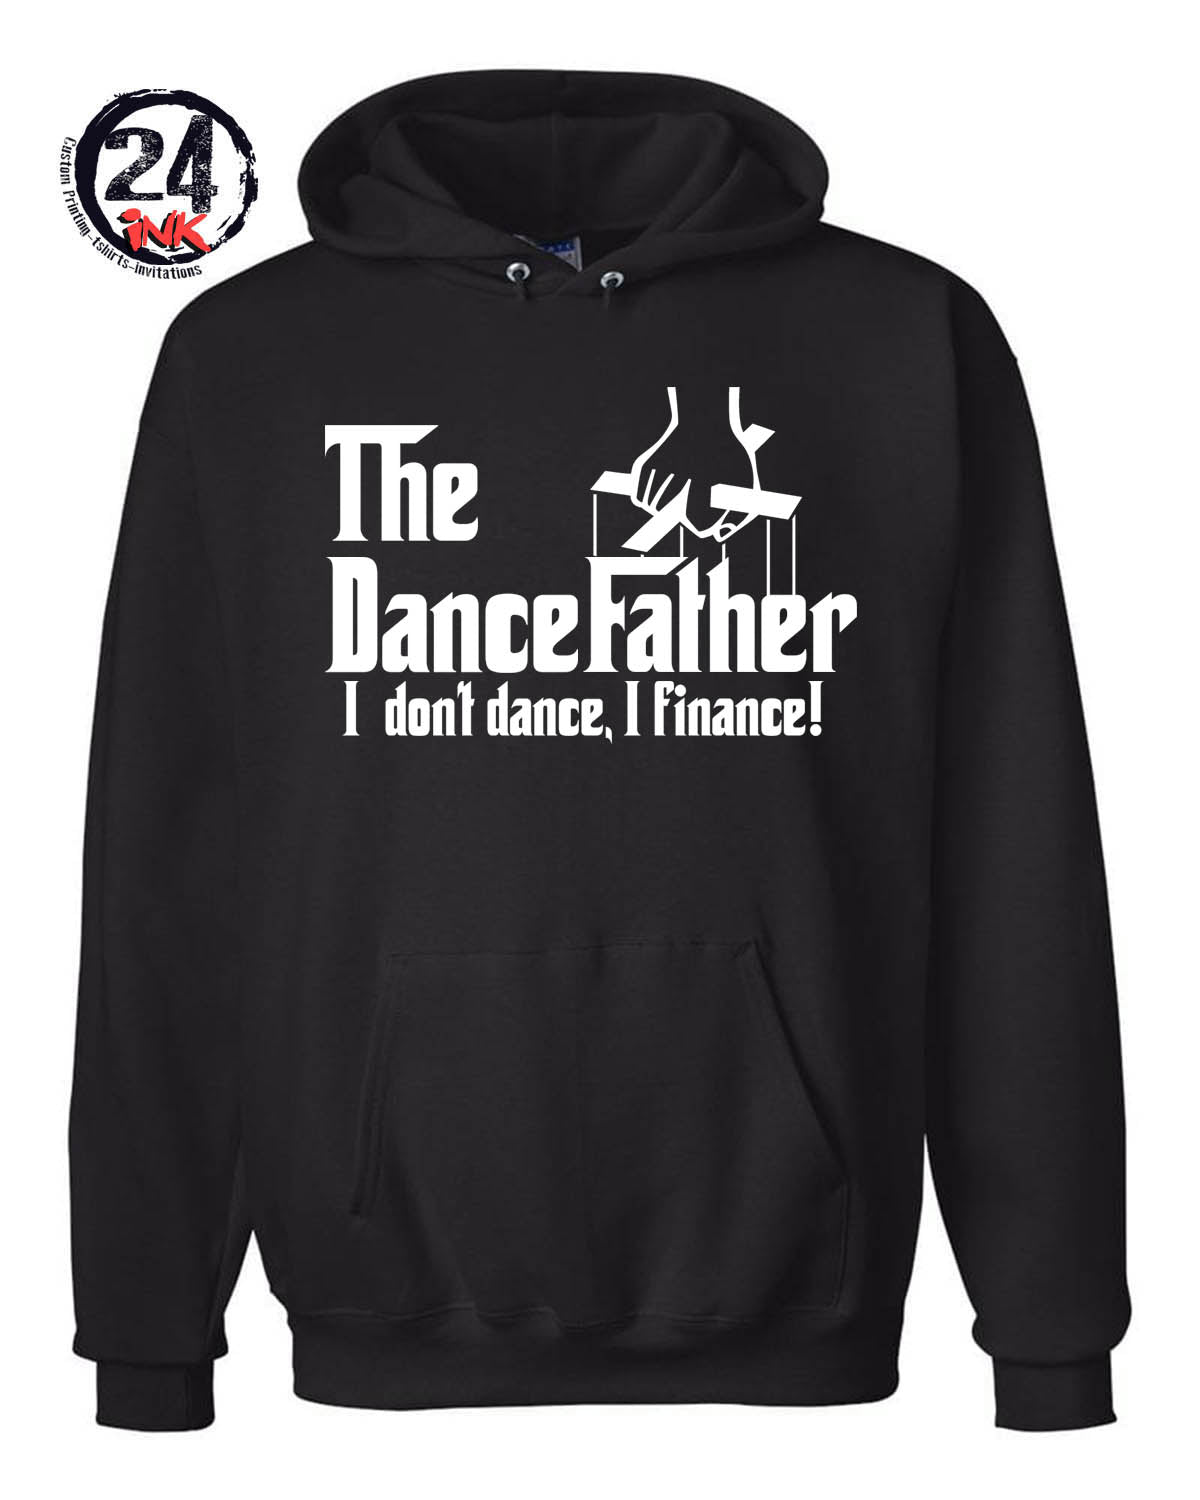 The Dance Father Shirt